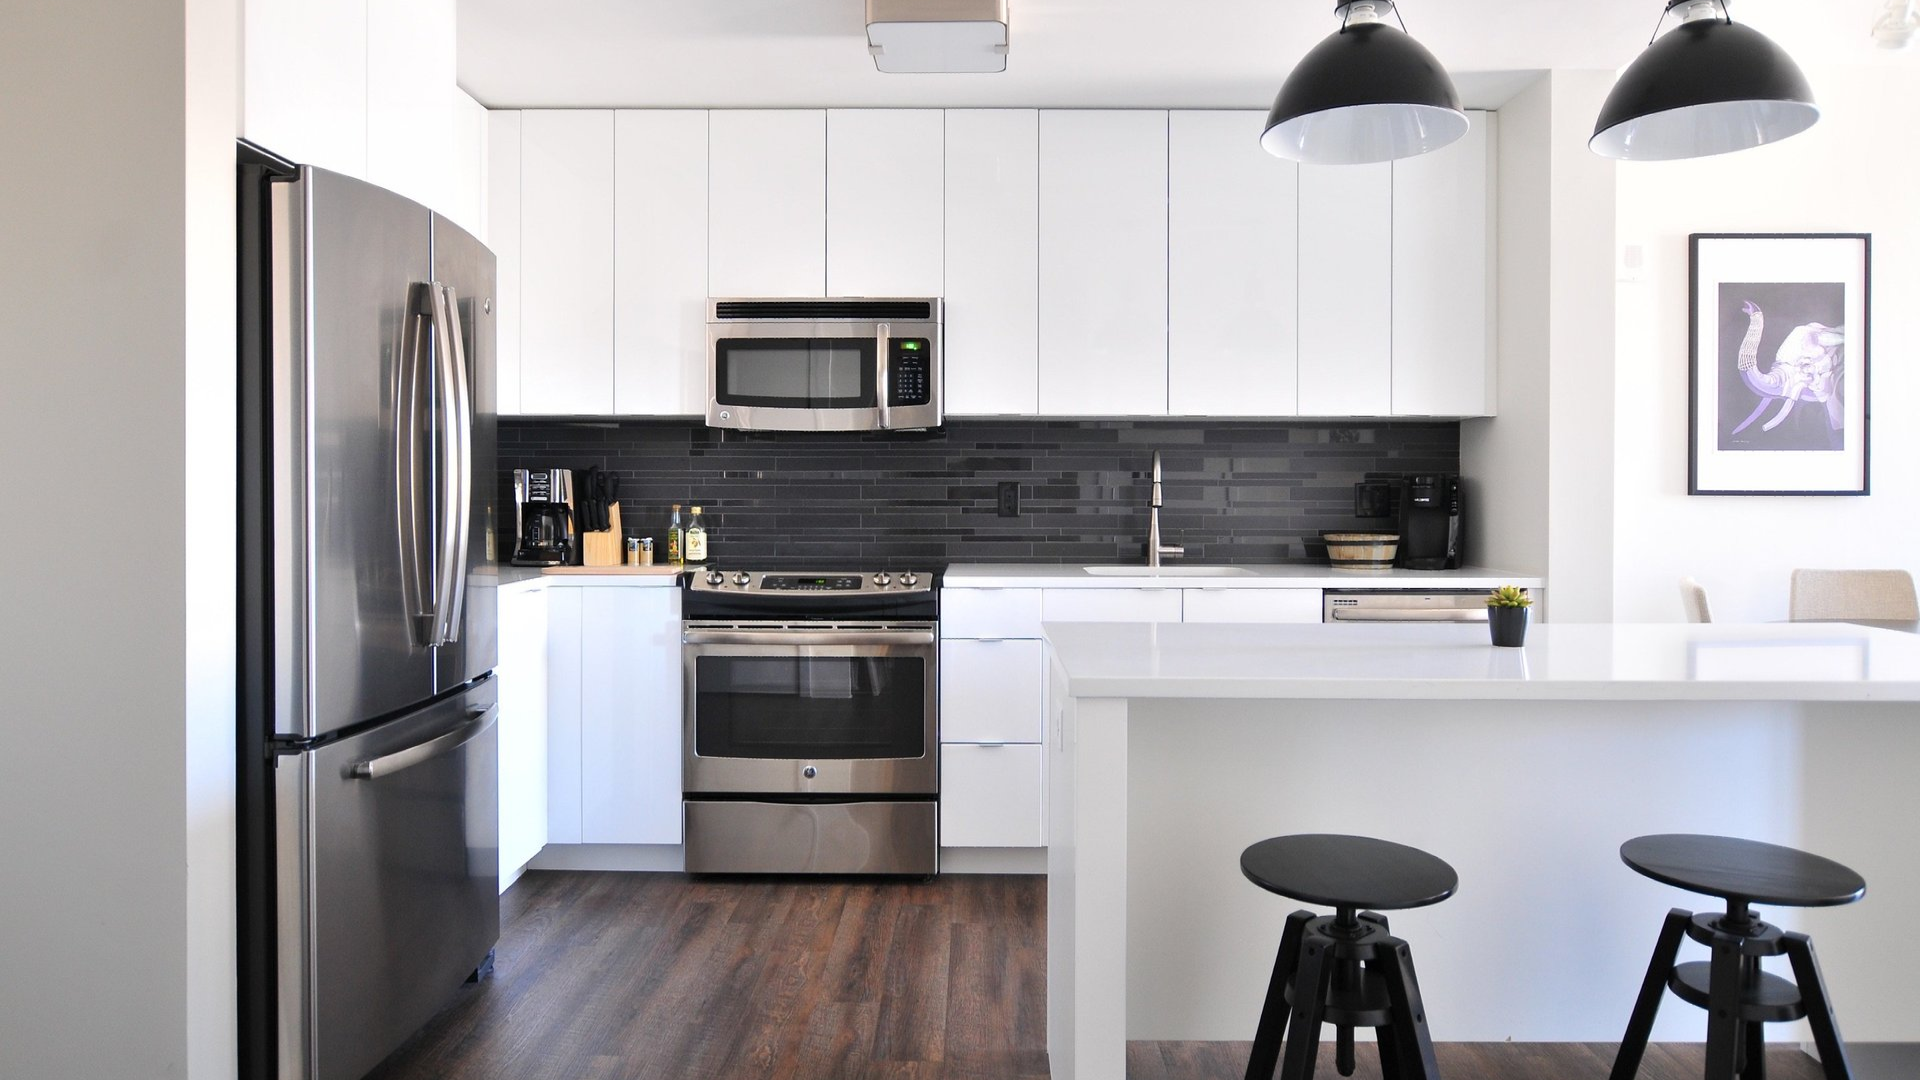 White kitchen with black accents